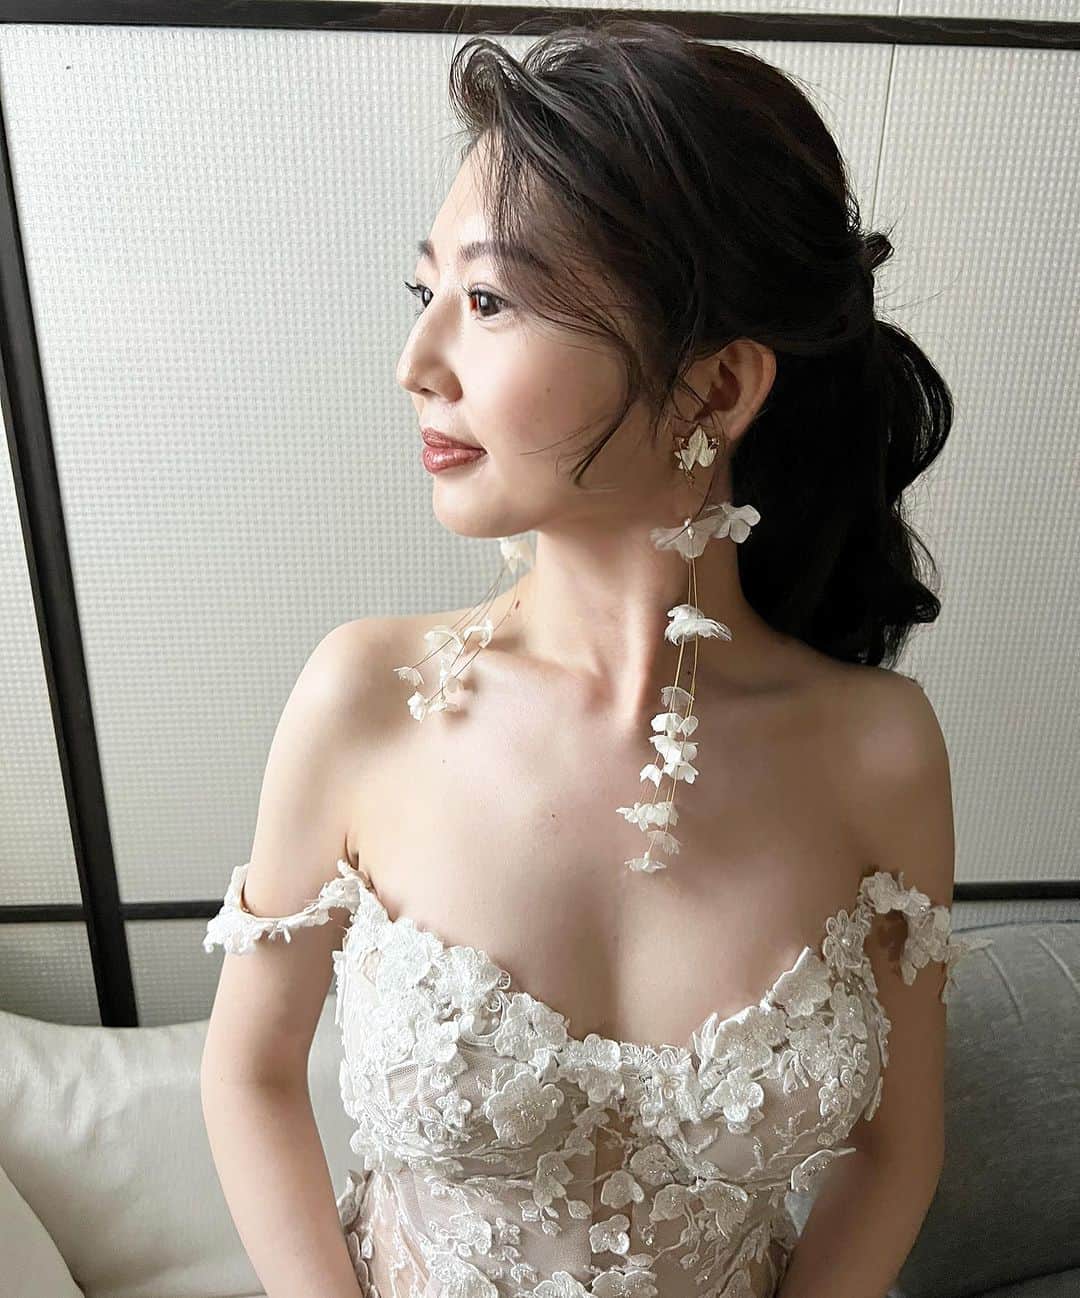 服部由紀子さんのインスタグラム写真 - (服部由紀子Instagram)「. ガリアラハヴのドレスは ポニーテールがとっても合う。  少しだけでも皆と同じポニーテールにならないように、  サイドの流れや、中心部分の繋ぎの表現も変えて。  キャシャな骨格に、 肩のレースが下がるアンニュイなドレスに  大人の色気とエレガントさと。  前髪は立ち上げた強さと、 耳に繋がるエアリー感を大切にしました。  うん、とっても美しい。  入場した時の歓声も、嬉しかったです。  seiraさん、京都までご指名くださり、 ありがとうございます♡  @ceu0116  @magnoliawhite_official  The ponytail fits me very well.  To avoid having the same ponytail as everyone else, Change the flow of sides and the expression of connecting the center part.  It's a cathy skeleton, in an ungainly dress that lowers the lace of lace Adult charm and elegance.  The strength of the bangs, I valued the airy feeling that connects to my ears.  Yes, it's very beautiful.  #プレ花嫁#東京花嫁#横浜花嫁#前撮り#結婚#大阪花嫁#ホテルウェディング#服部由紀子#キッズモデル募集 #ヘアメイク#白無垢ヘア#パレス花嫁#パレスホテル東京#hairstyle#京都花嫁 #ウェディングブーケ#ブーケ#東京前撮り#フォーシーズンズ京都 #丸の内前撮り#パレスホテル東京ウエディング#hair #パレス花嫁 #京都ウェディング  #前撮りヘア」9月11日 19時53分 - ceu0116